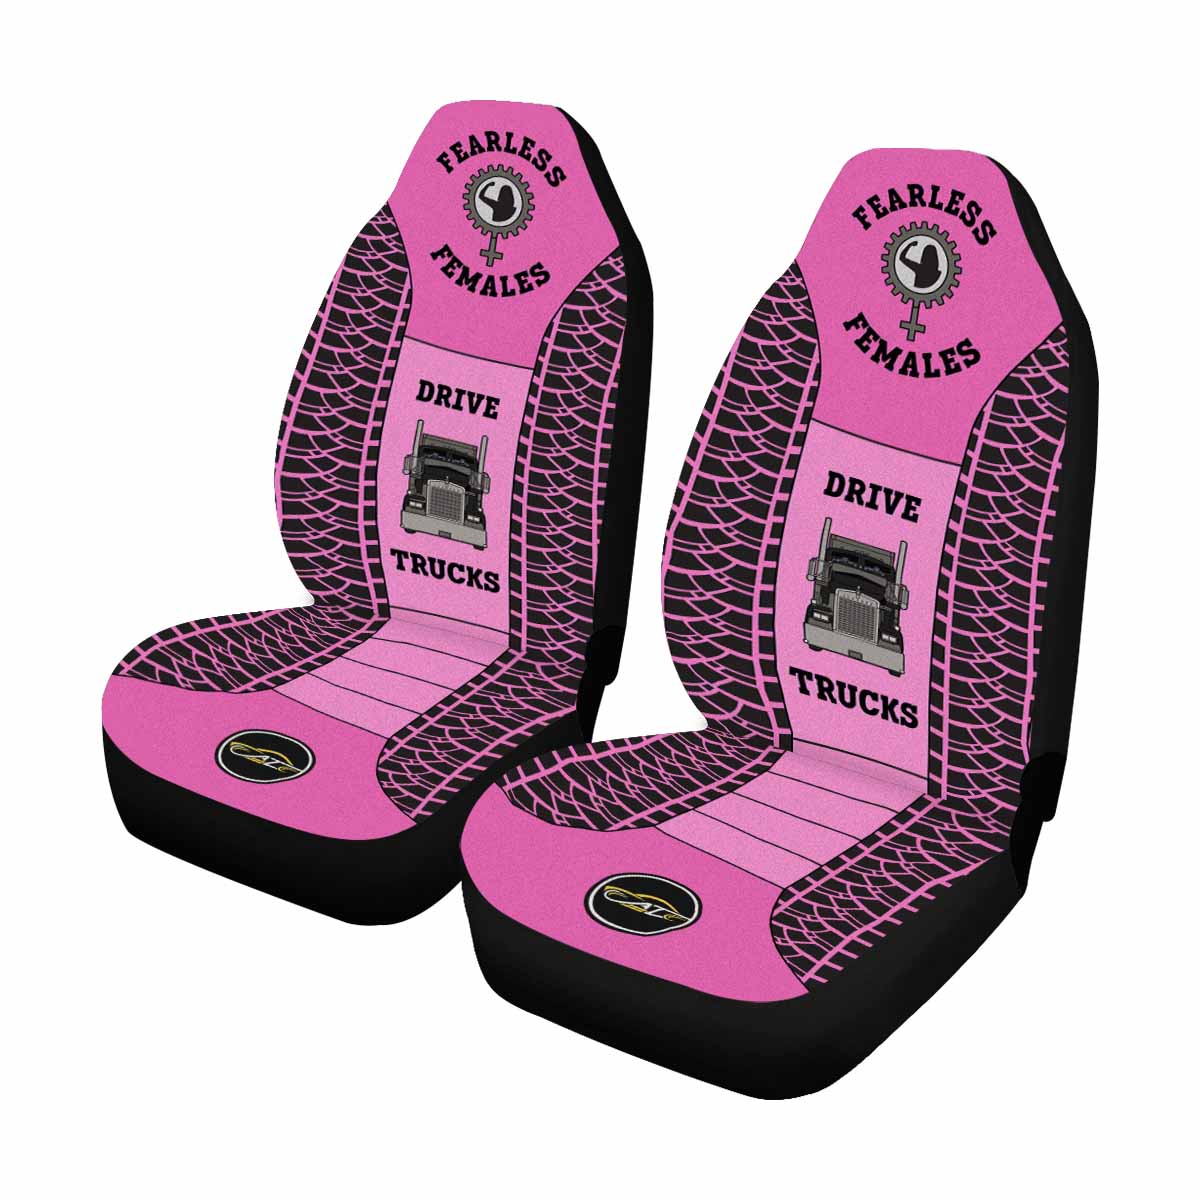 Fearless Female Trucker Car Seat Covers - Set of 2 Autozendy